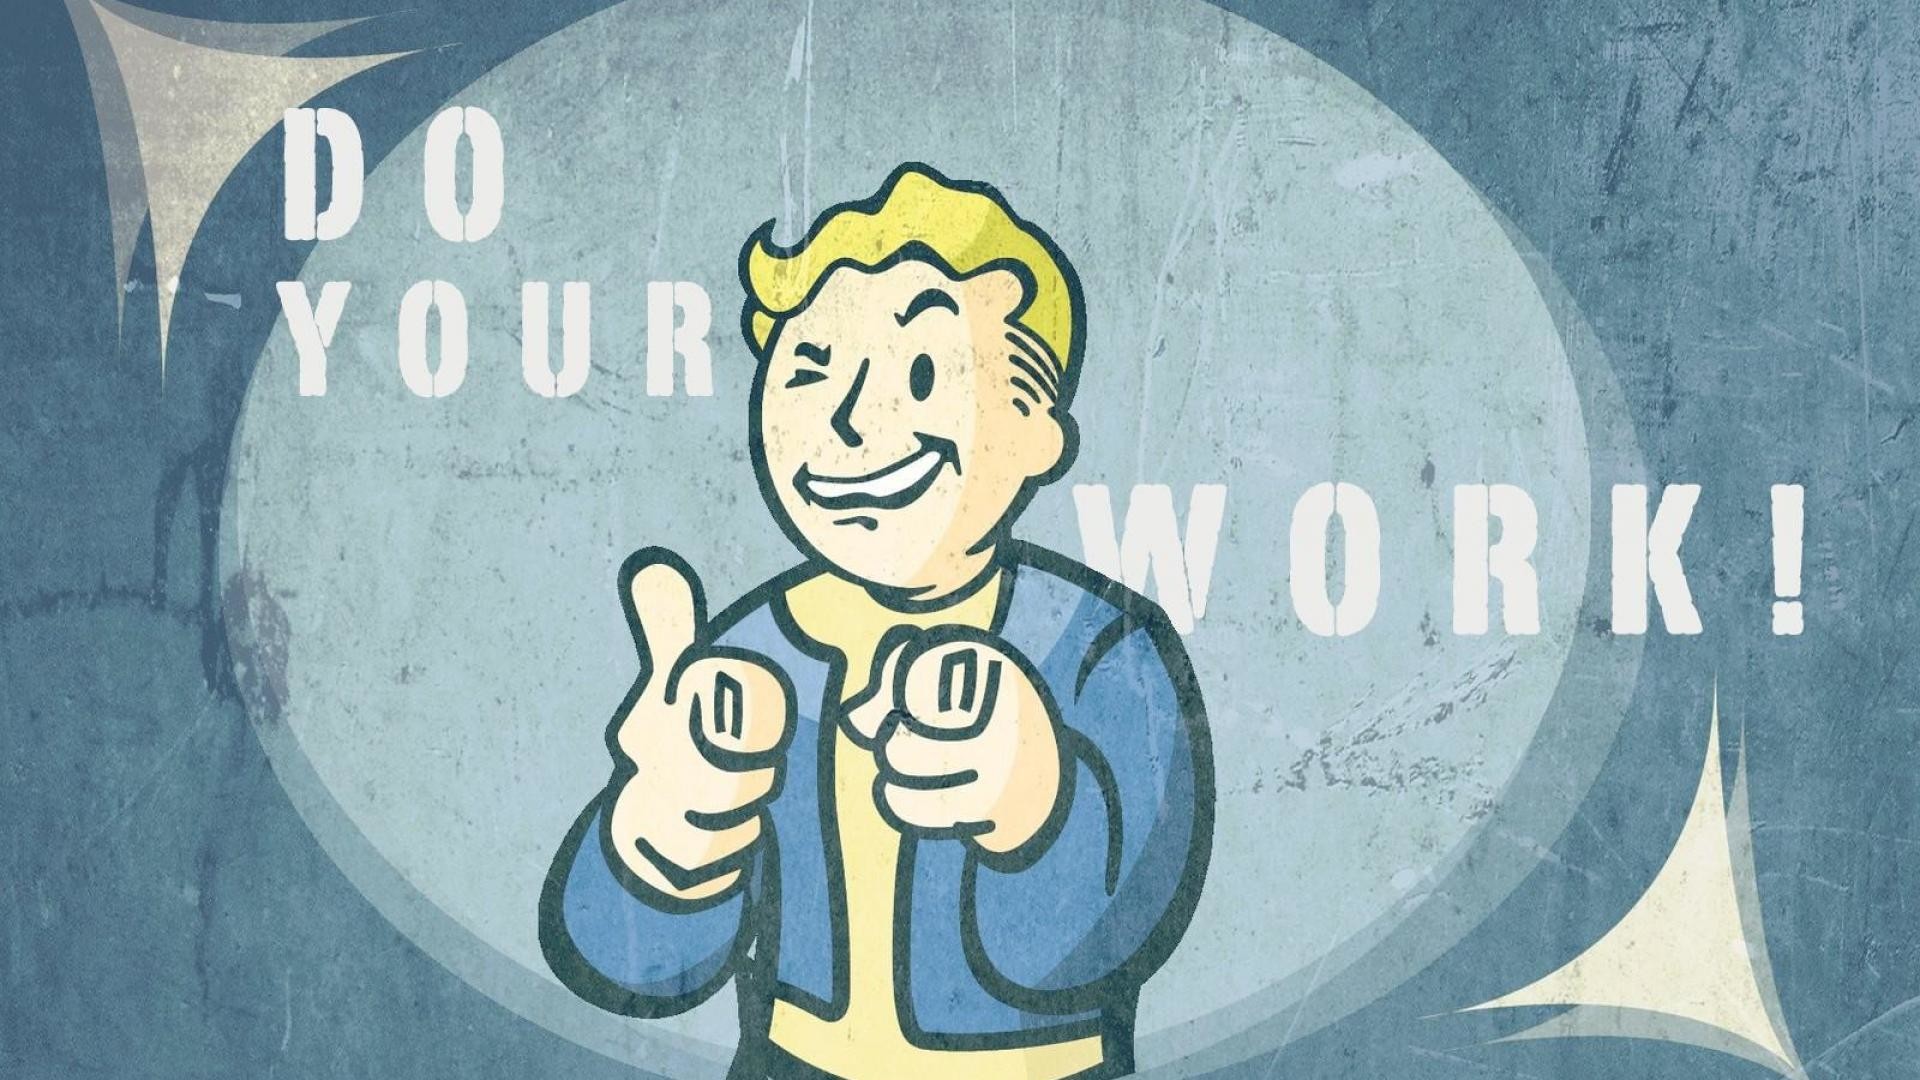 1920x1080 Search Results for “vault boy wallpaper – Adorable Wallpapers